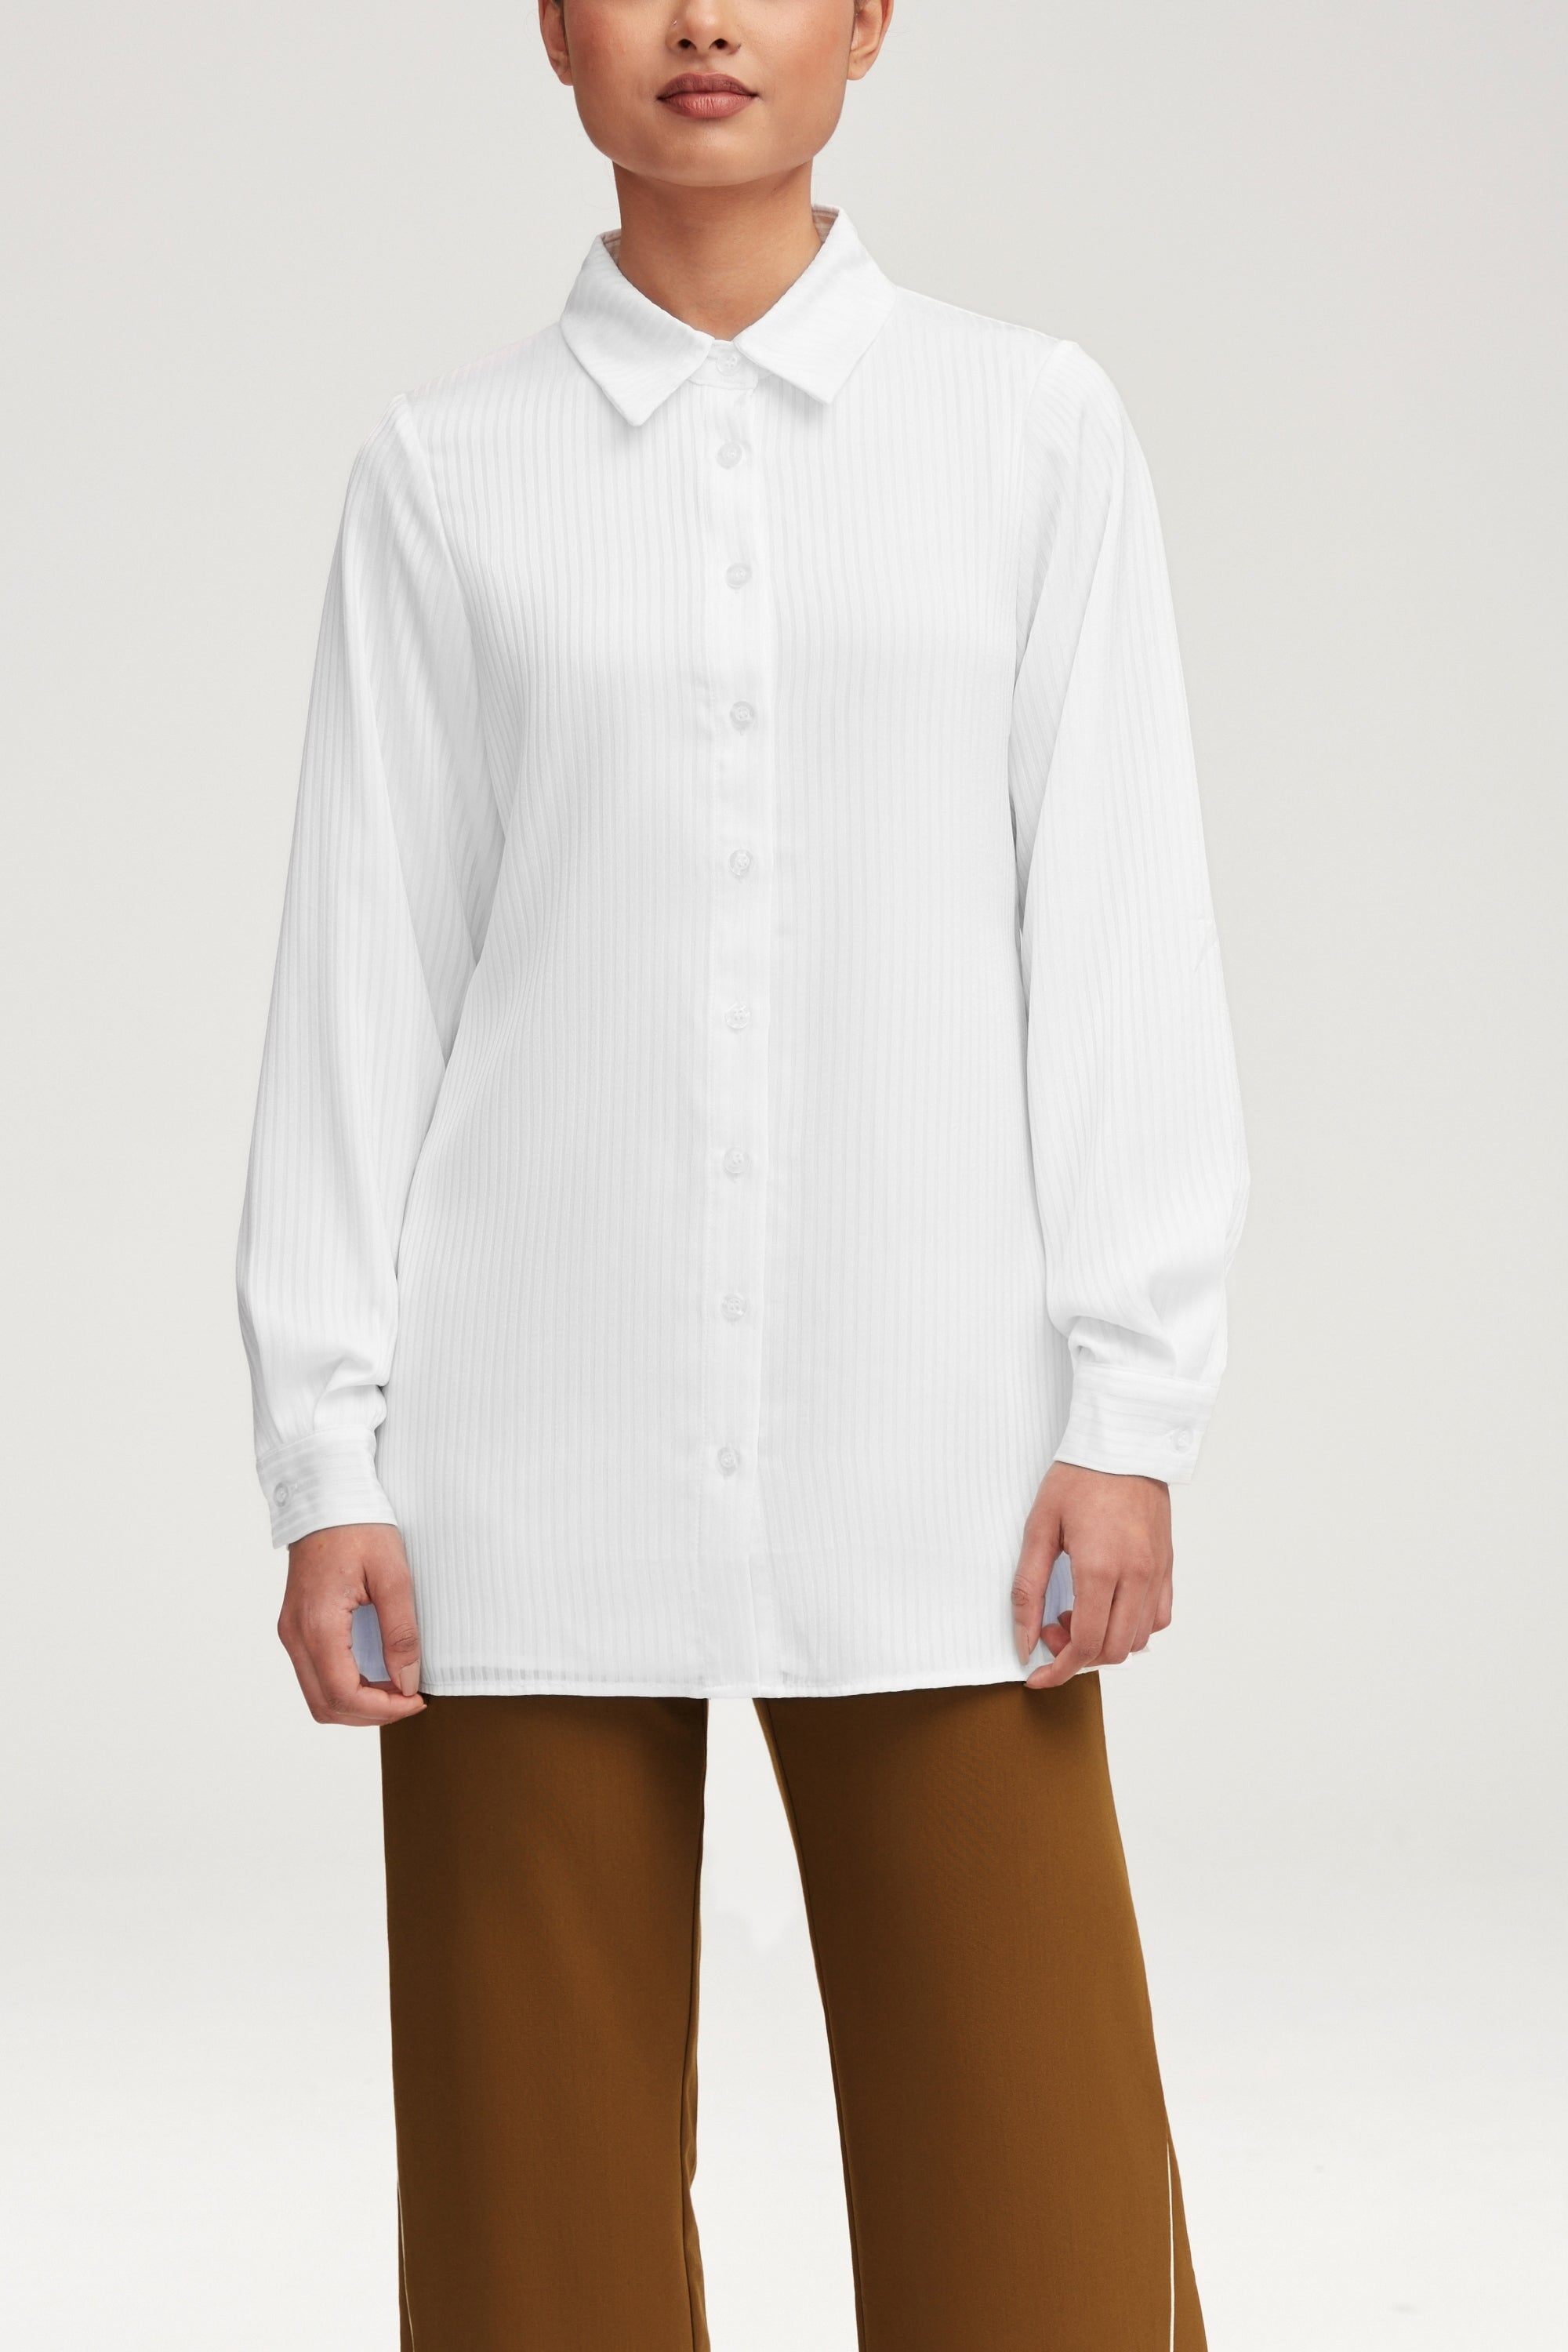 Jaserah Button Down Top - White Clothing epschoolboard 